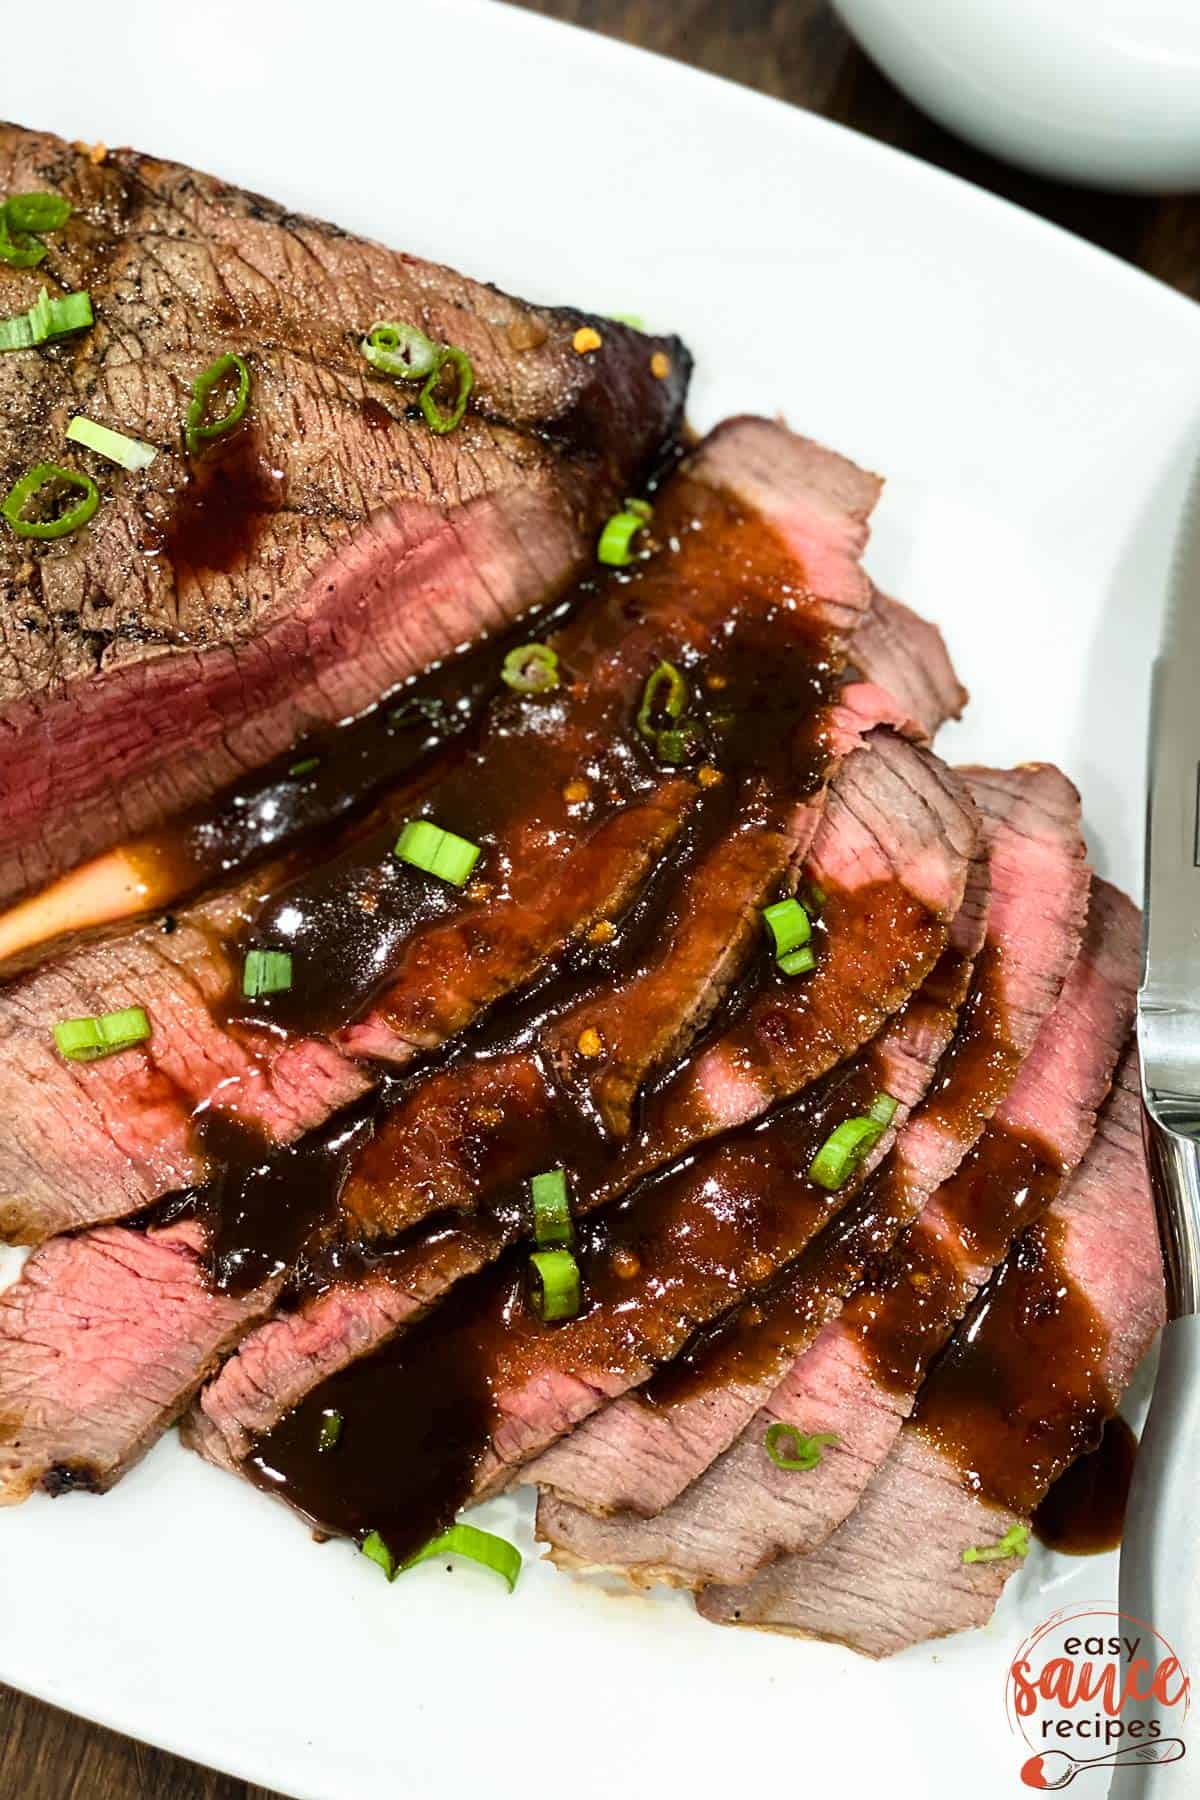 Strips of london broil with marinade